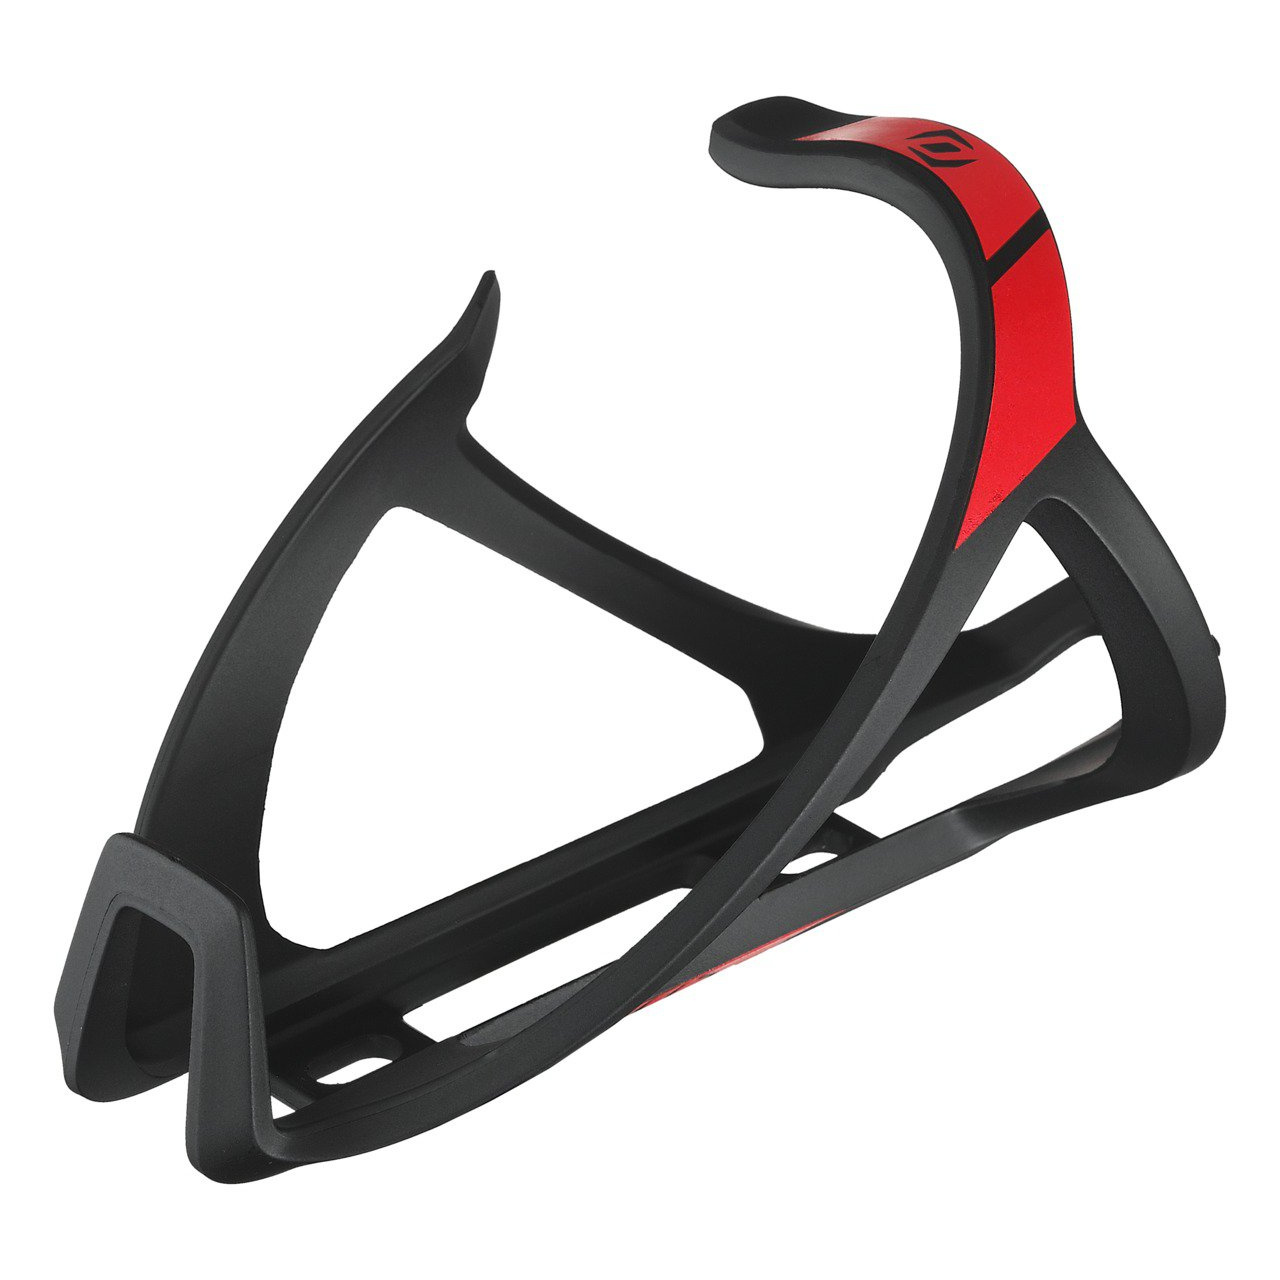 Scott Bottle Cage Syncros Tailor Cage 1.5 Left